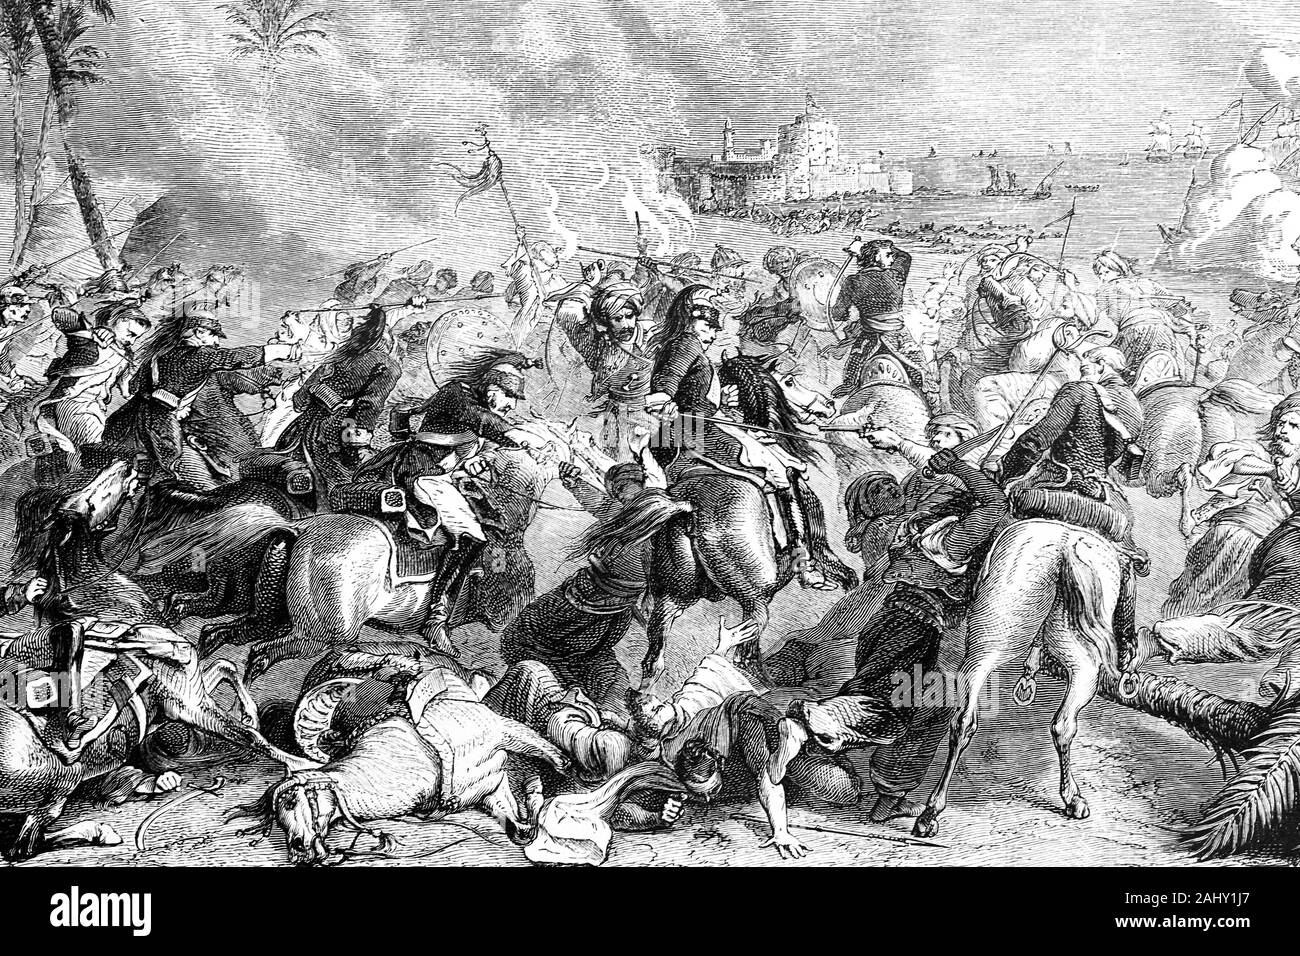 Battle of Abukir, Egypt. French campaign, 25th July 1799. French victory. Antique illustration. 1890. Stock Photo